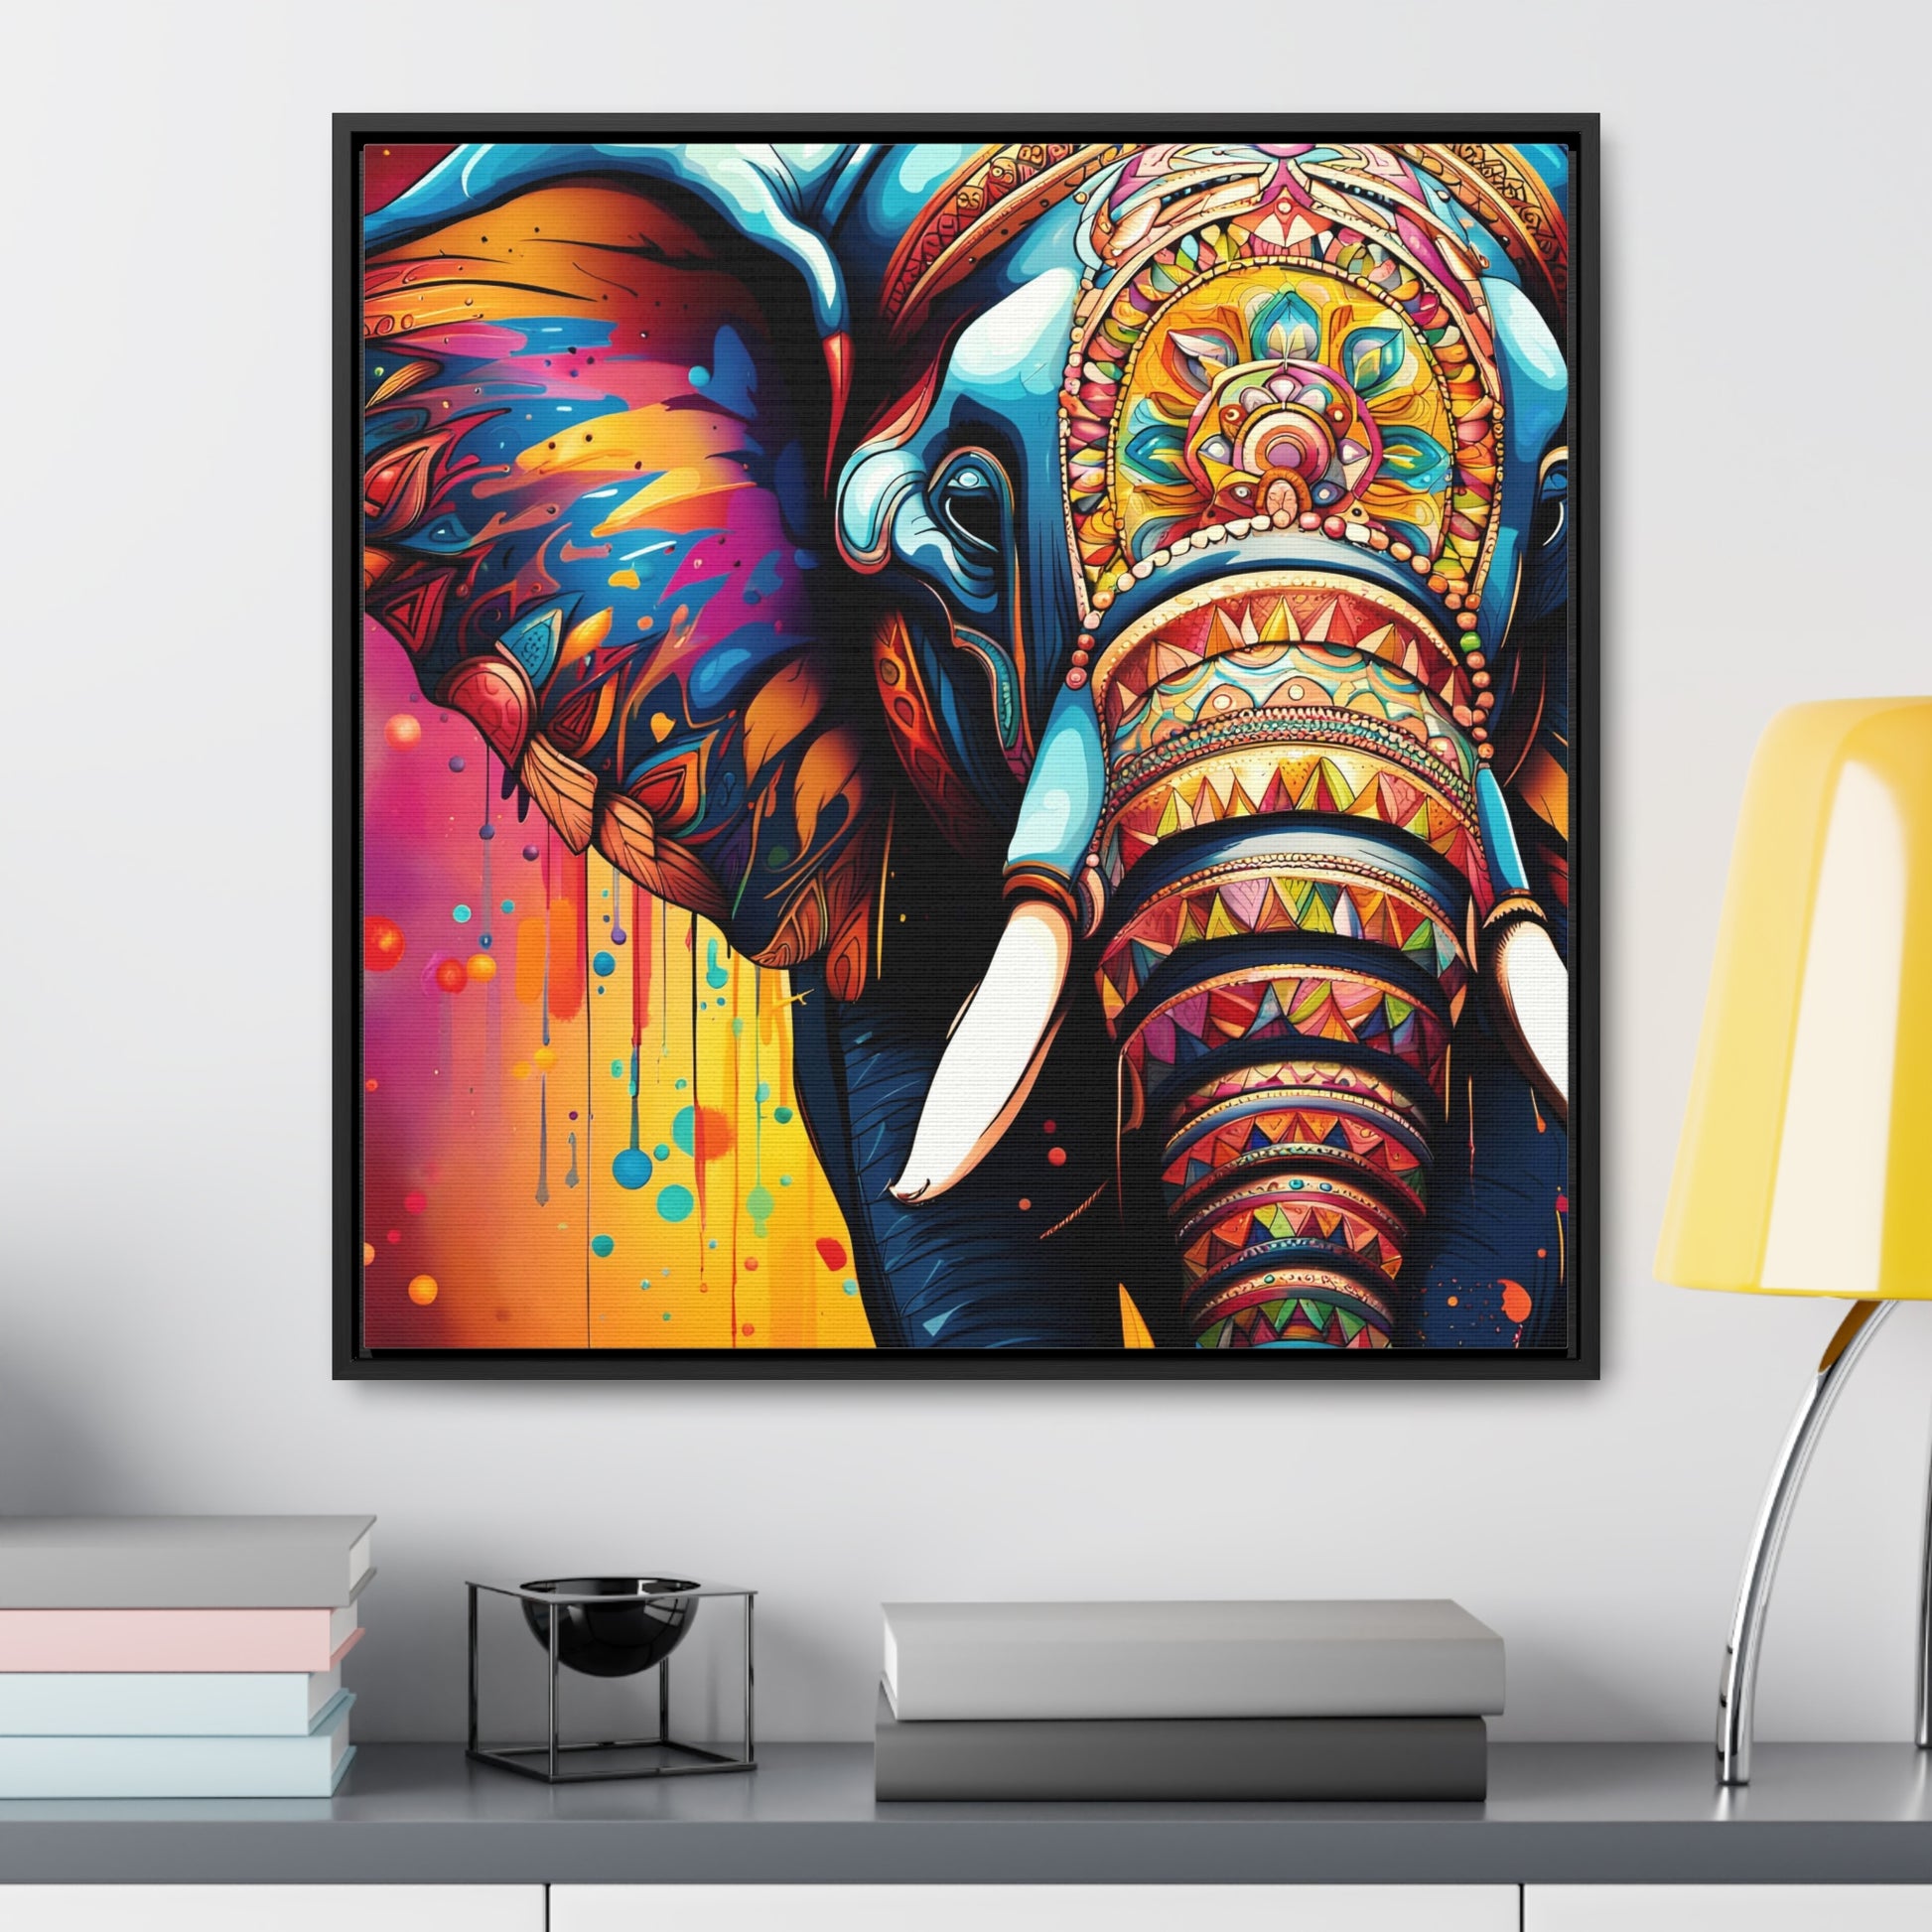 Stunning Multicolor Elephant Head Print on Canvas in a Floating Frame 24x24 hung on light wall